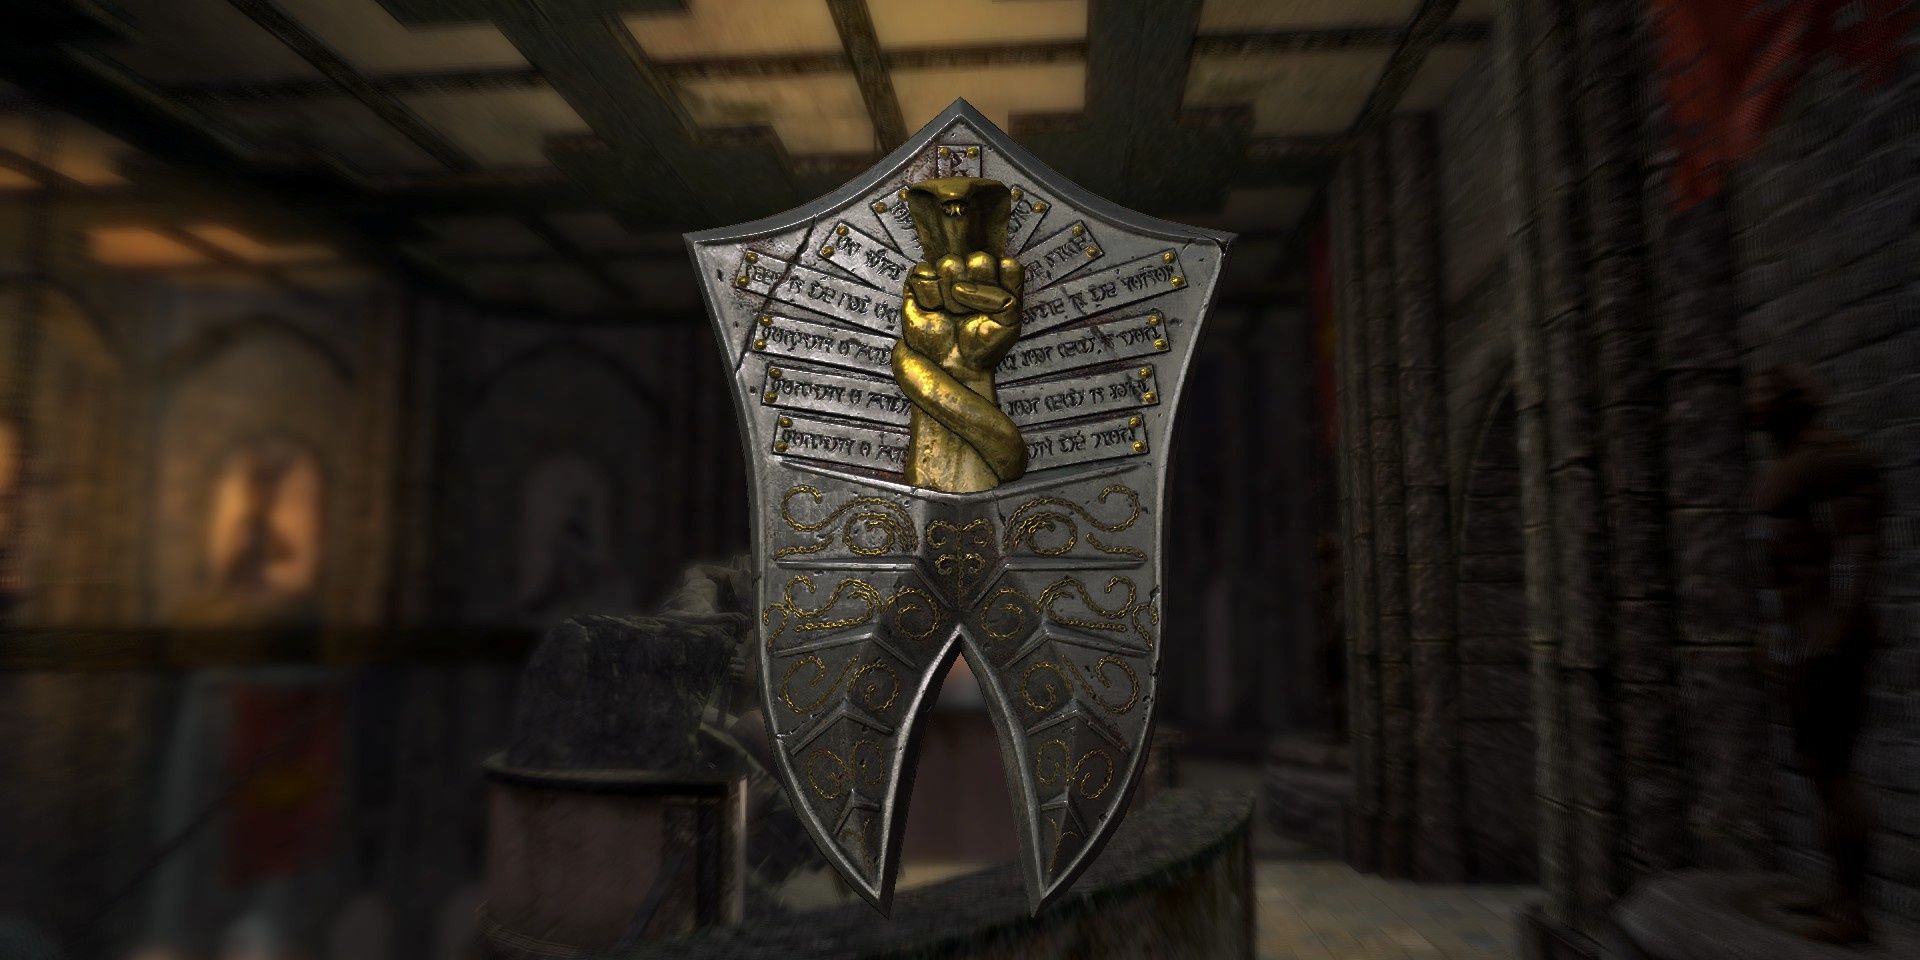 Skyrim Fearstruck modded shield. From Legacy of the Dragonborn Wiki